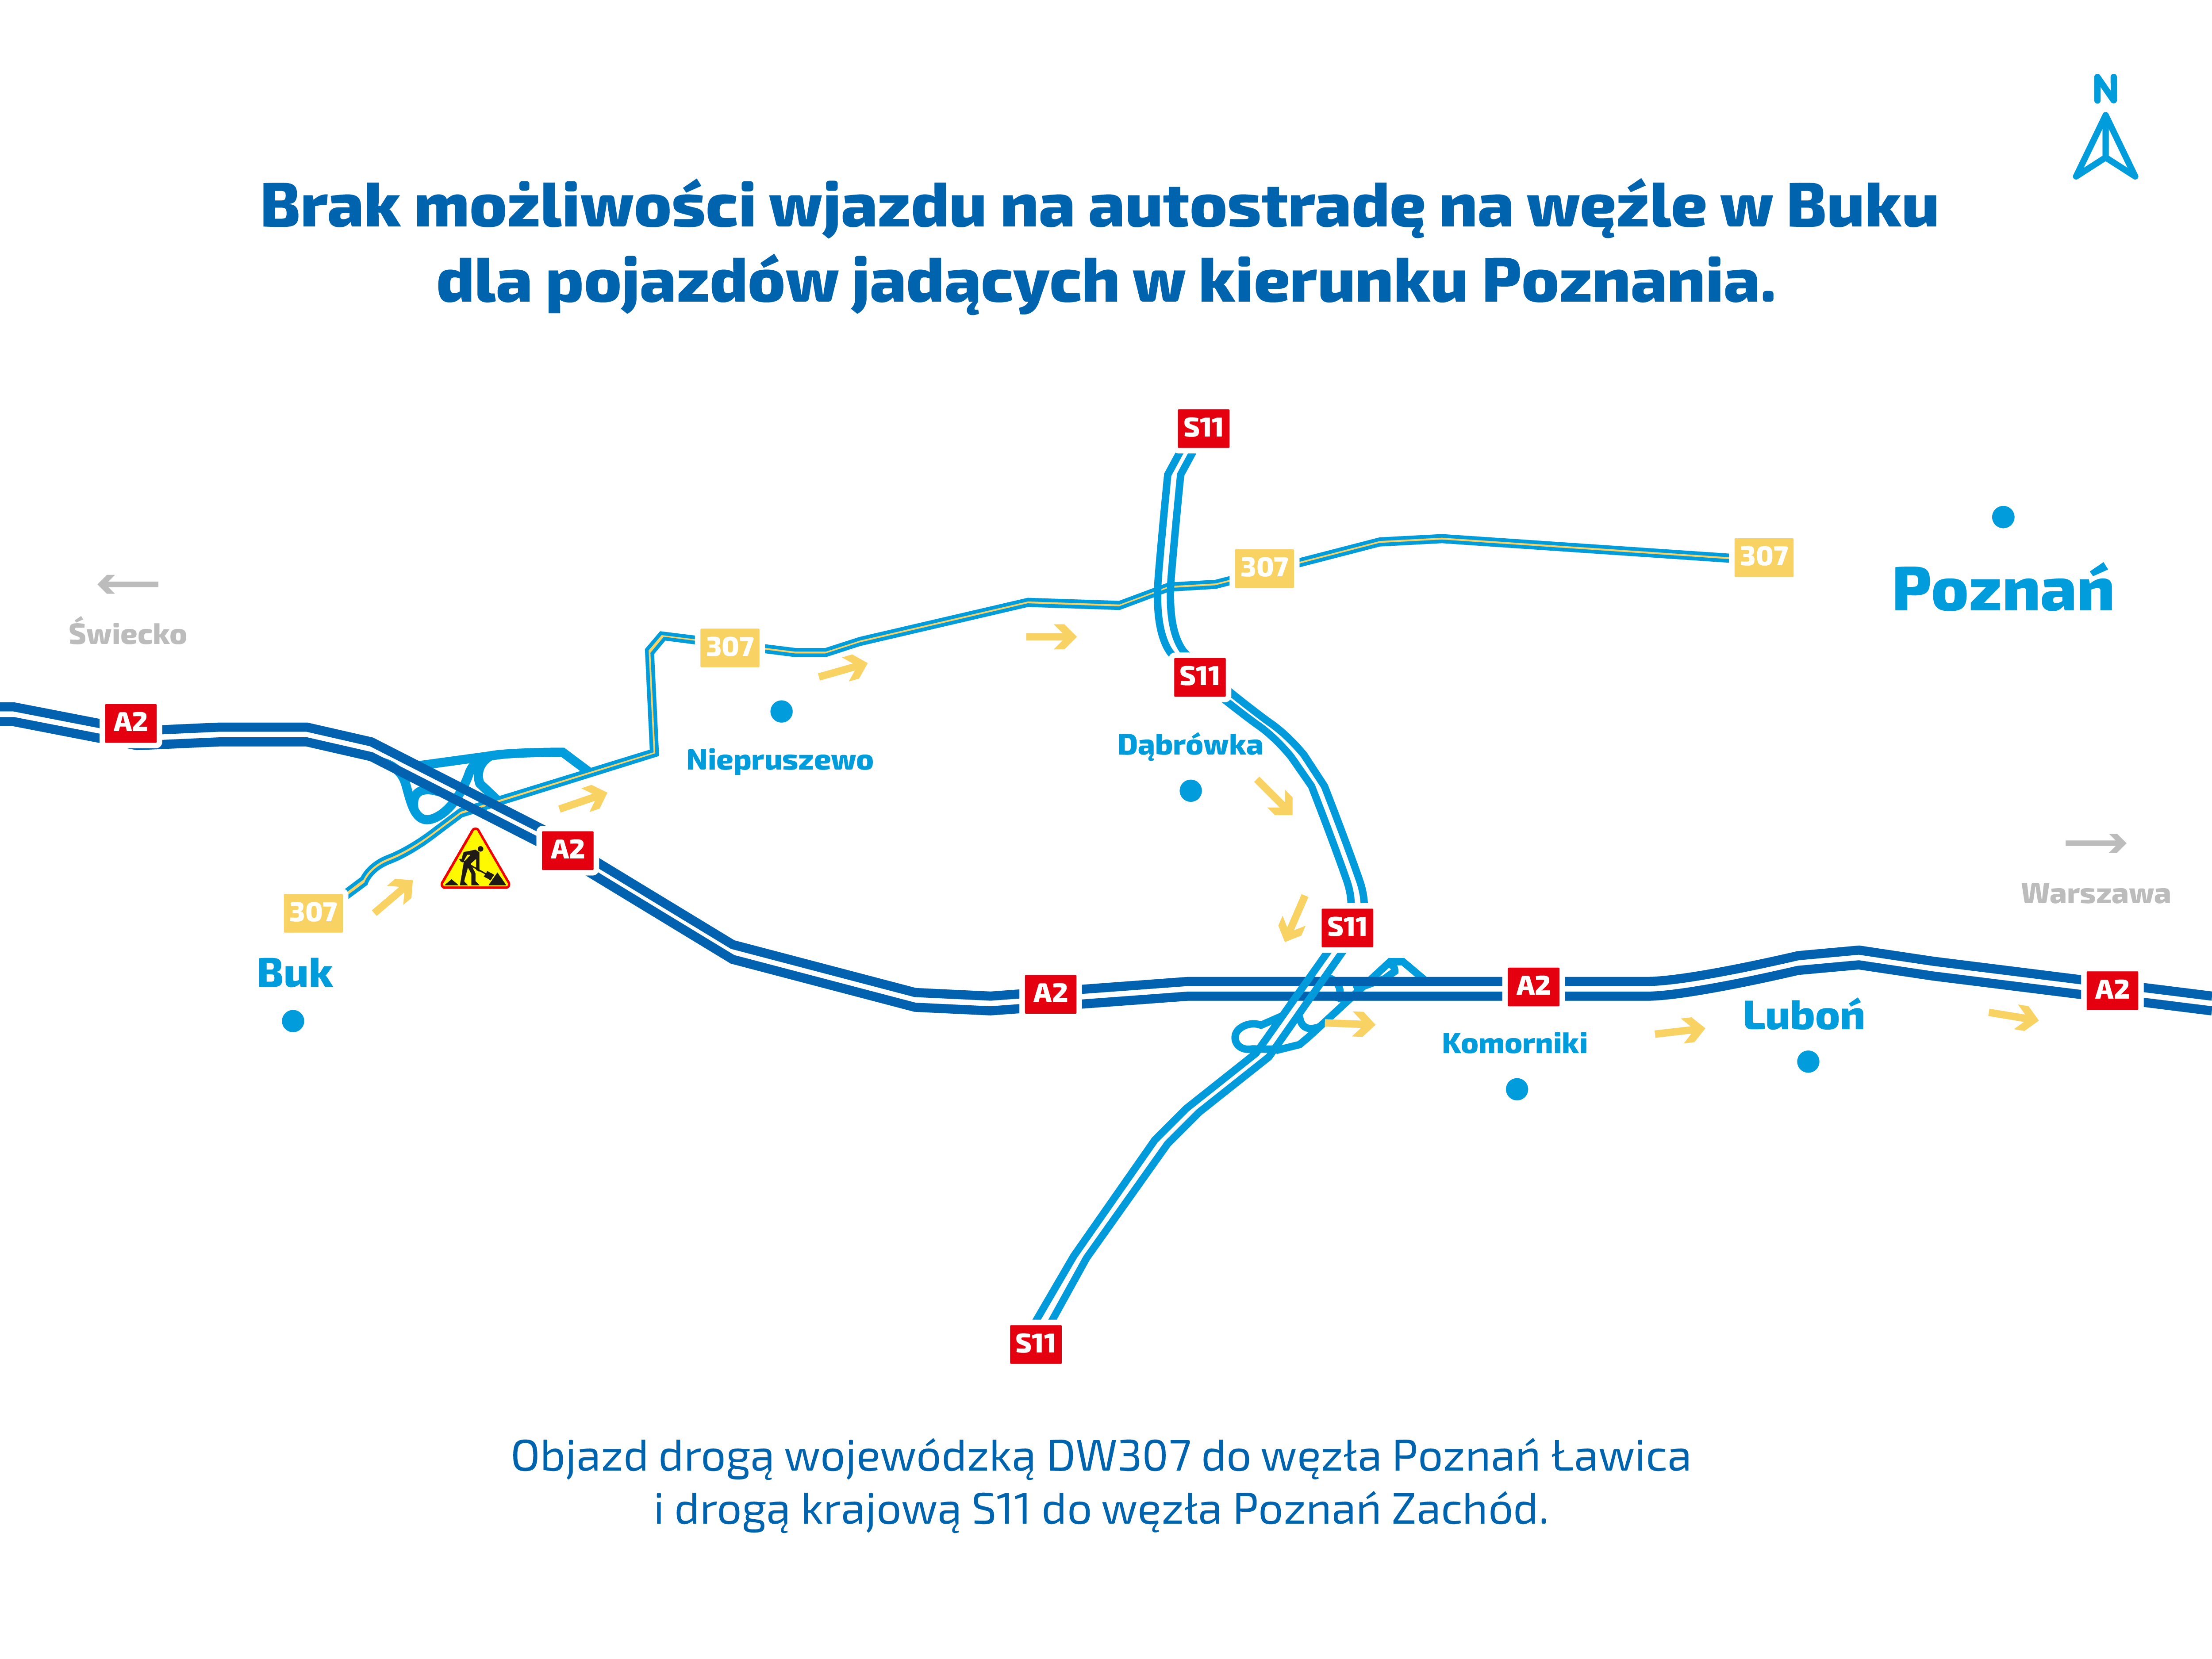 Pavement upgrading in the Buk area of the A2 motorway